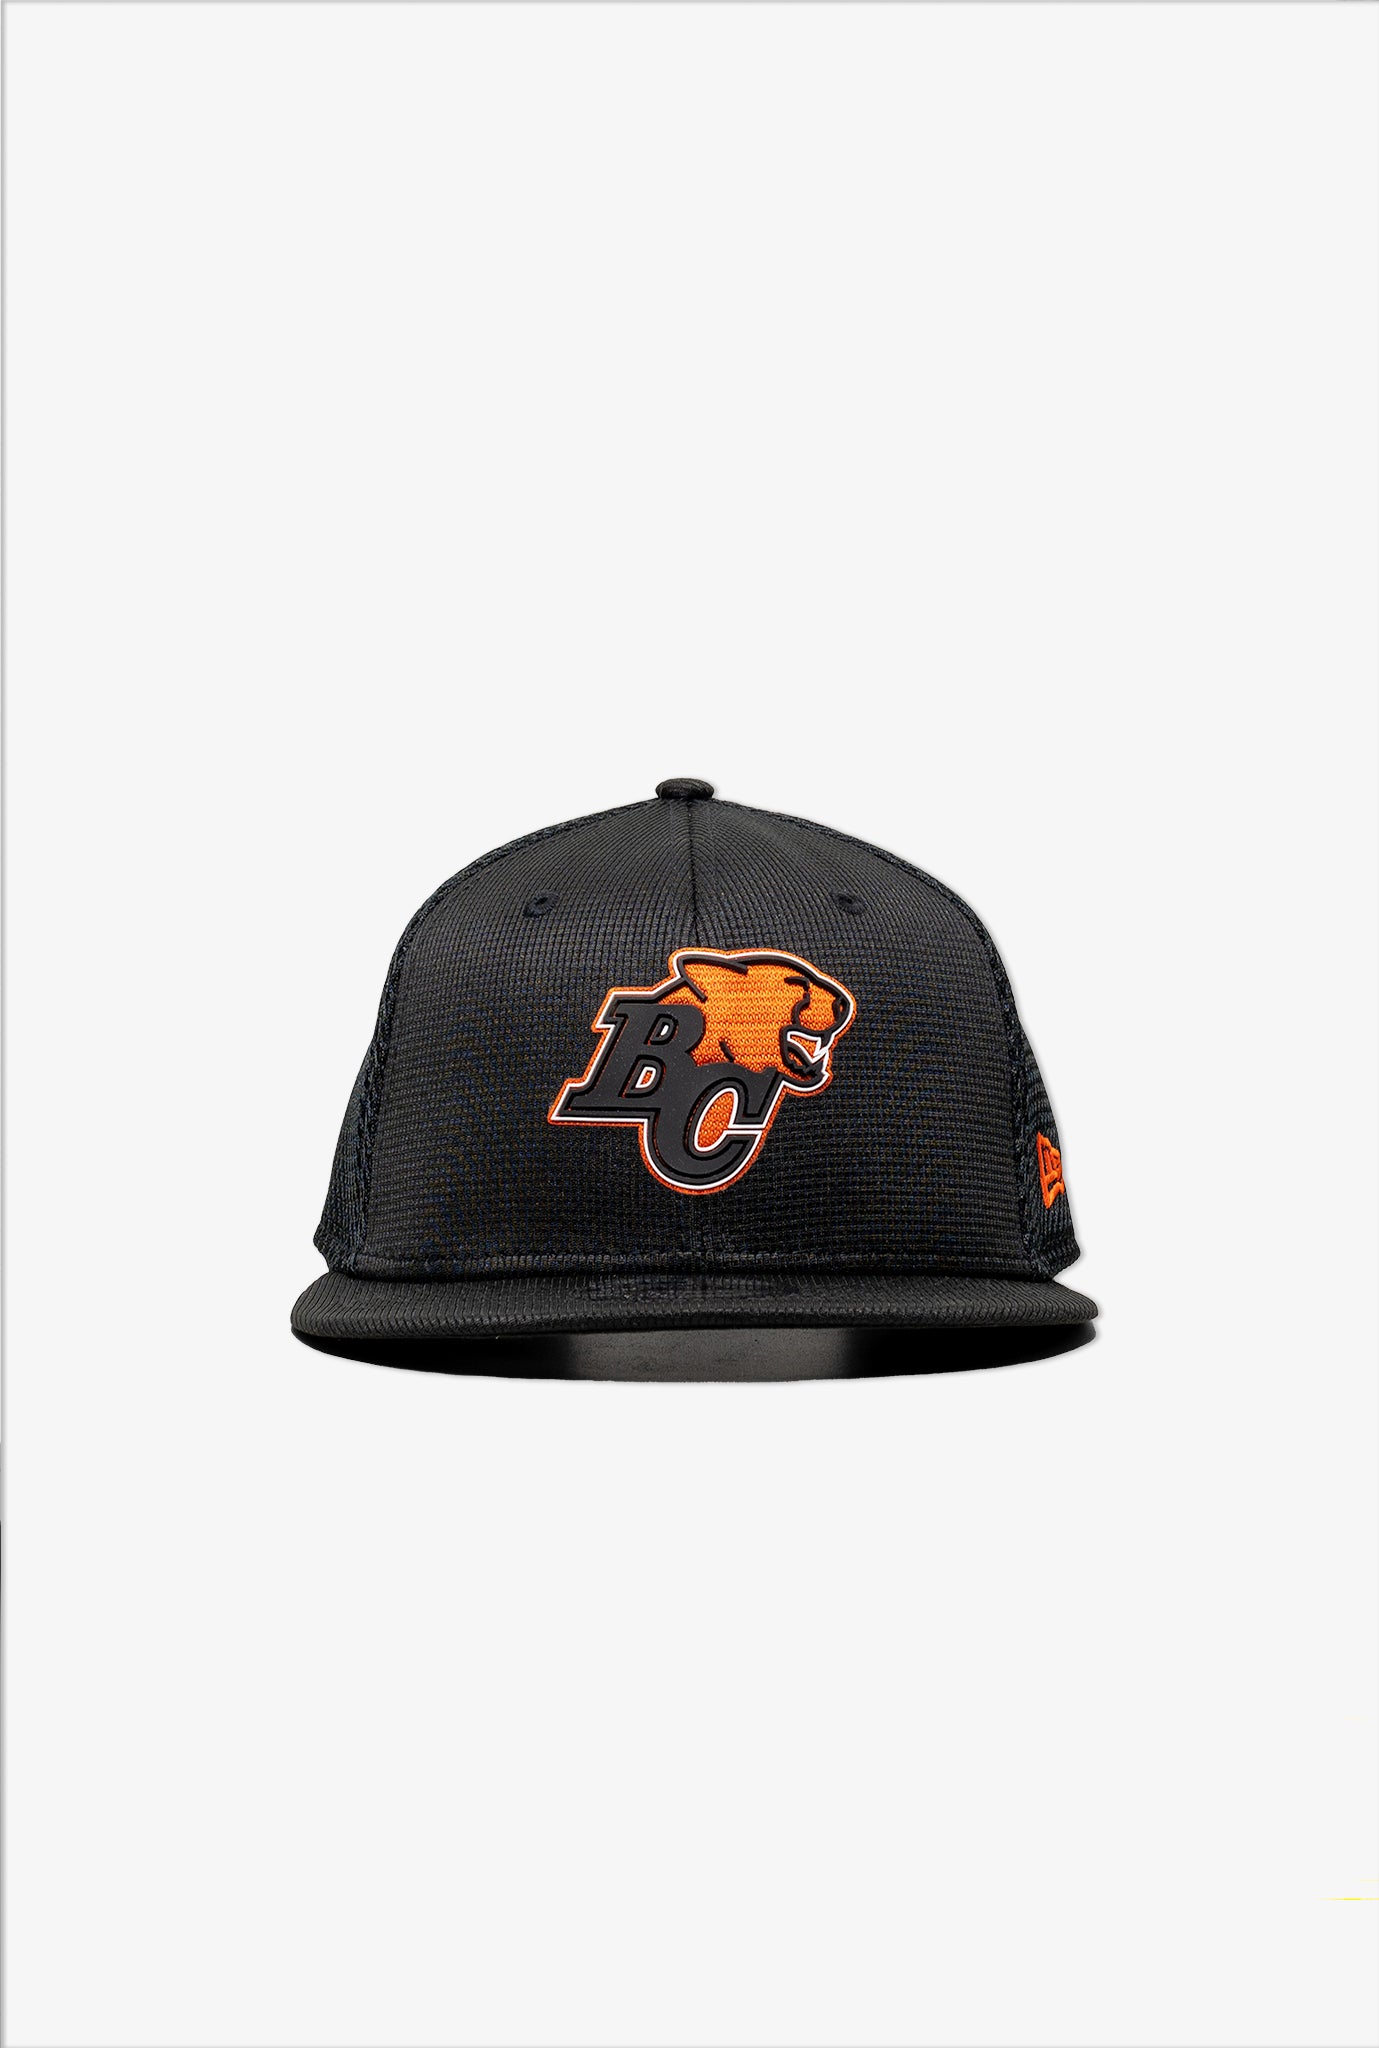 BC Lions 9FIFTY Sideline Snapback